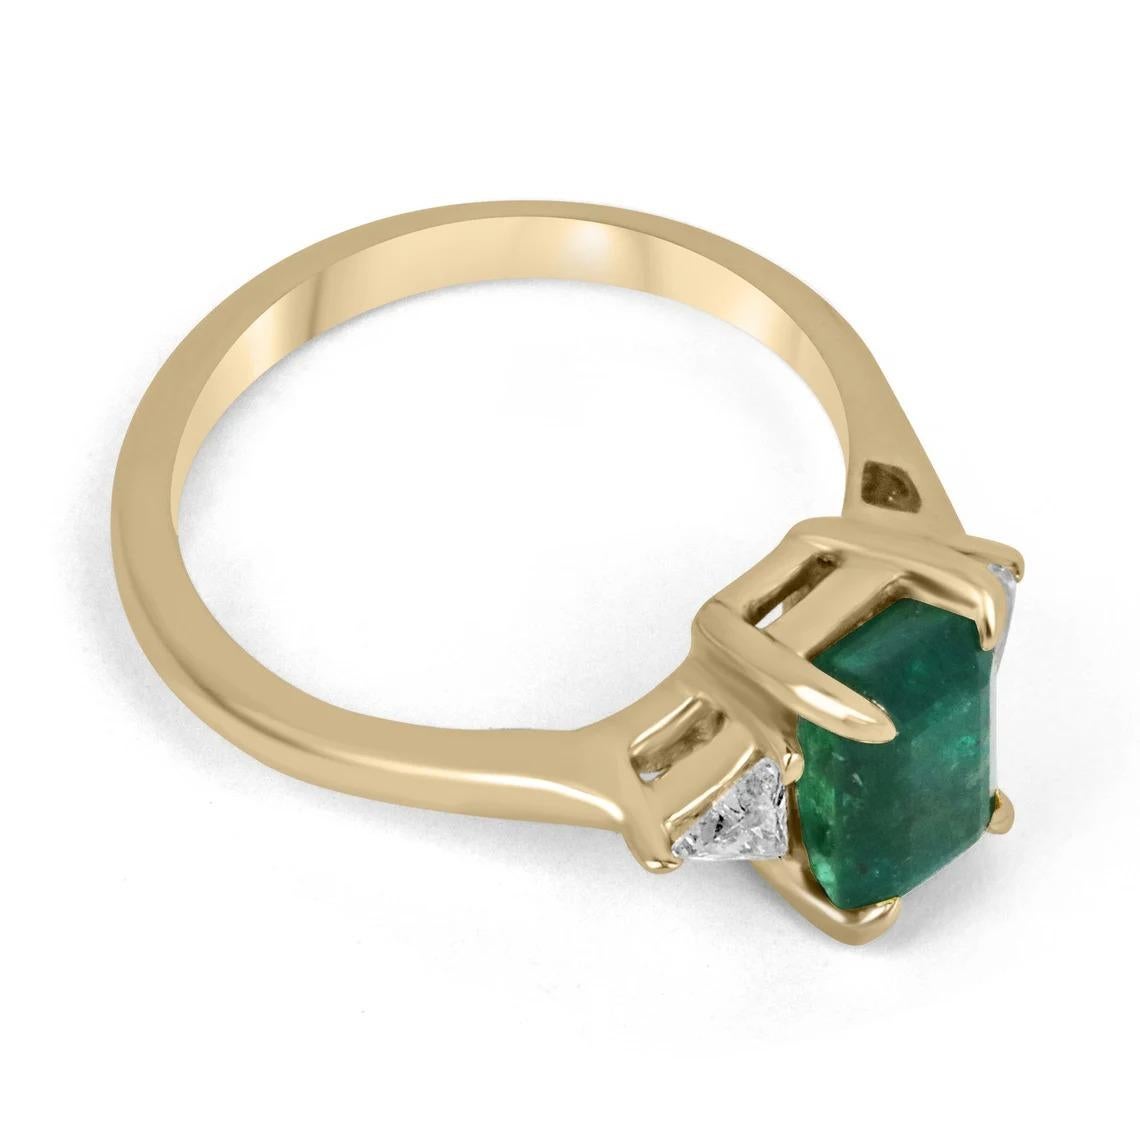 A luxurious emerald and diamond three-stone ring. This magnificent piece features a remarkable emerald cut emerald from the origin of Zambia as the center stone. The gem displays a dark, desirable emerald green color with very good transparency and